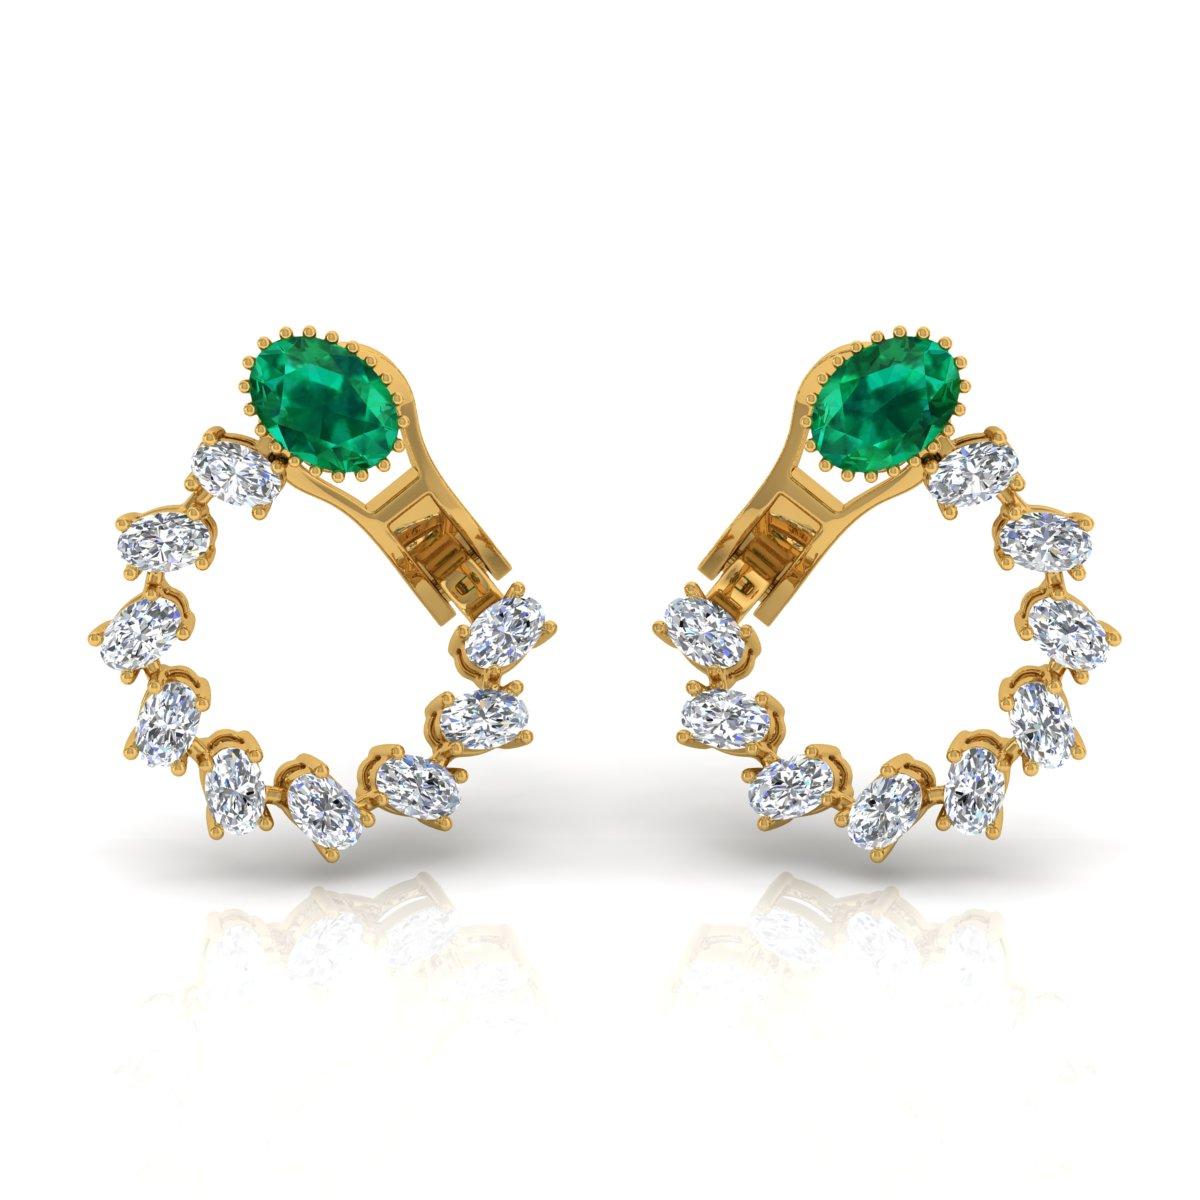 Code :- SEE-1233
Gross Wet. :- 6.02 gm
18k Gold Wet. :- 5.23 gm
Natural Diamond Wet. :- 1.82 Ct. ( AVERAGE DIAMOND CLARITY SI1-SI2 & COLOR H-I )
Emerald Wet. :- 2.12 Ct.
Earrings Length :- 20 mm approx.
✦ Sizing
.....................
We can adjust